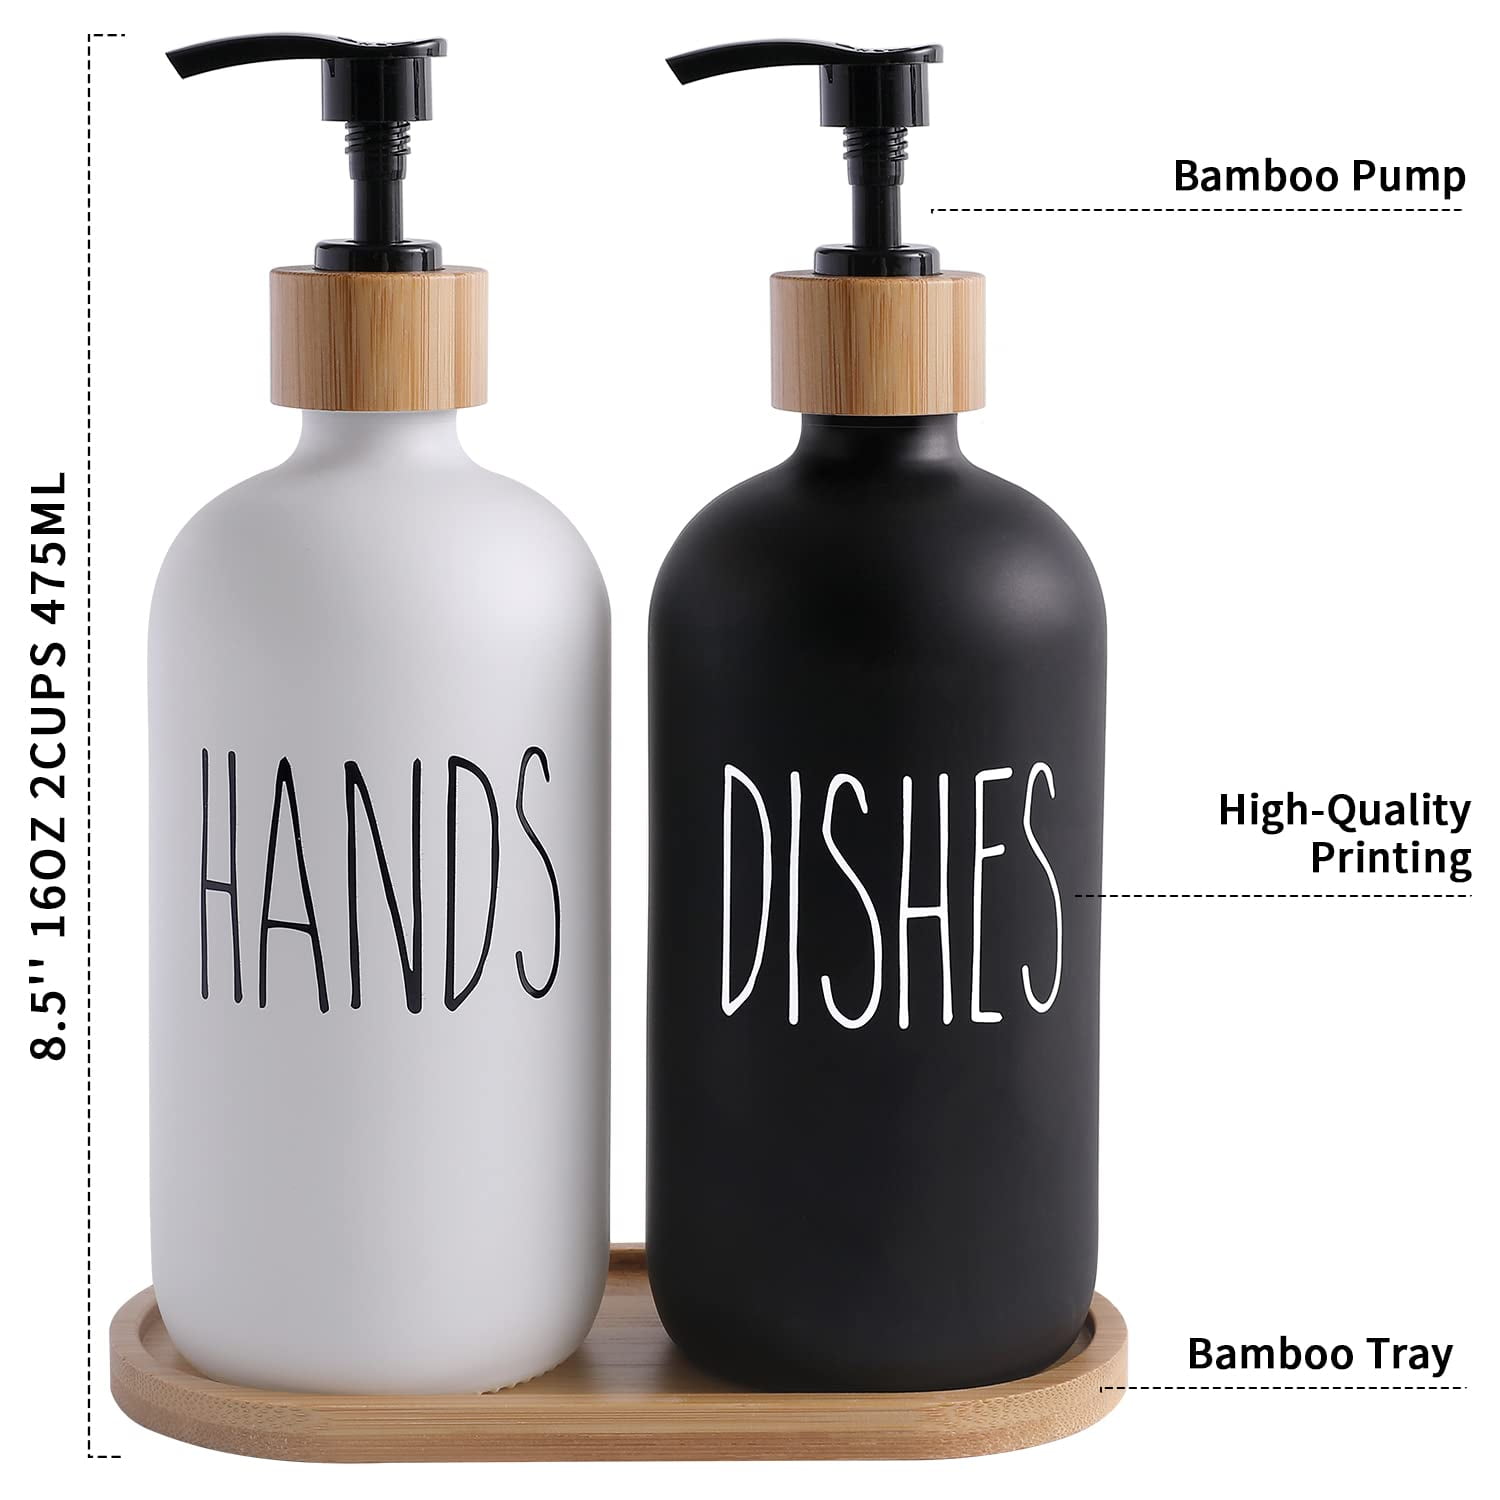 MaisoNovo Dish Soap Dispenser for Kitchen Sink w. Bamboo Pump and Soap Tray